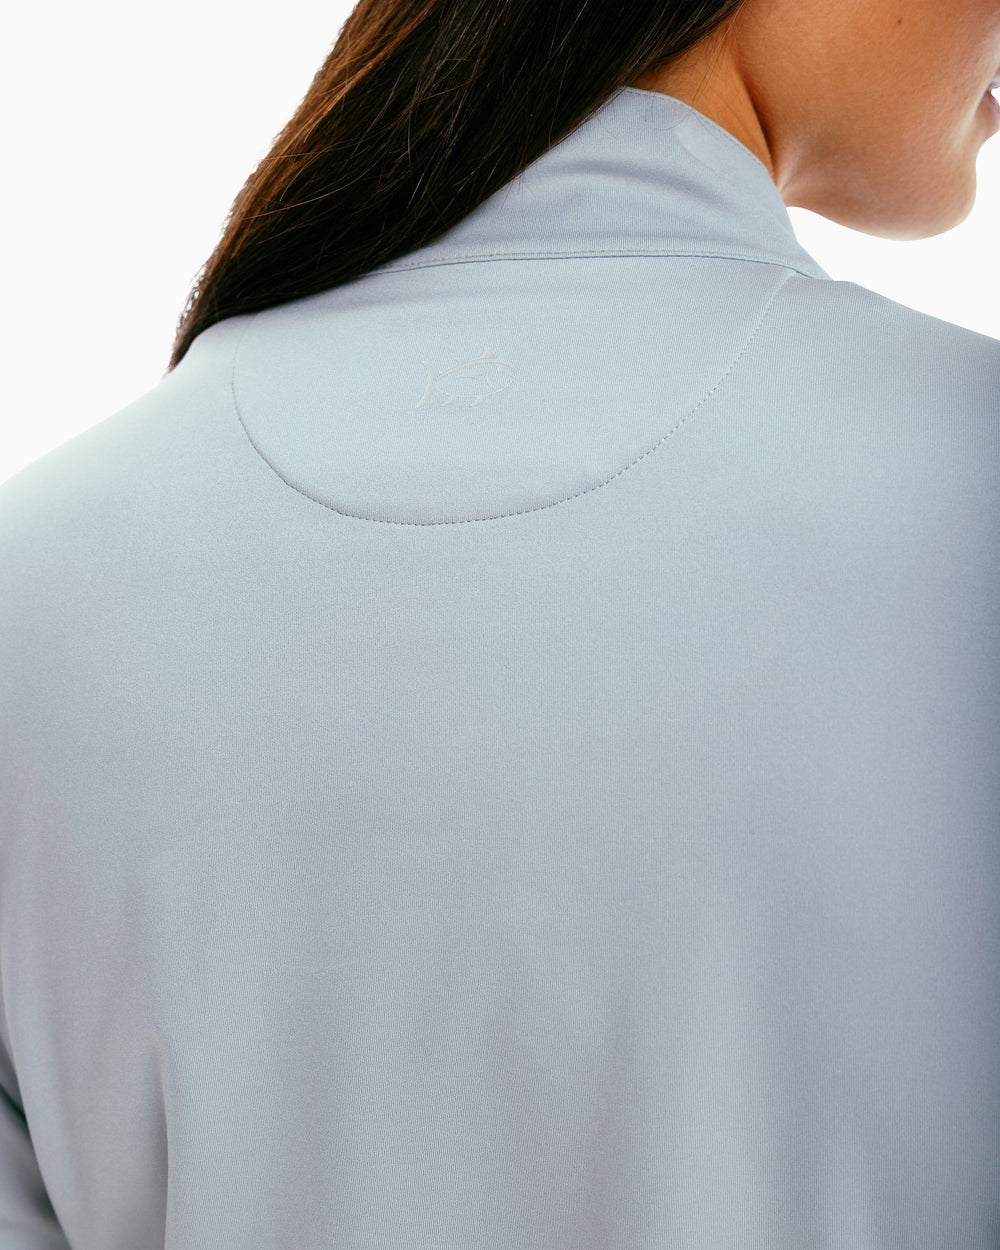 The back detail of the Women's Josette Mixed Media Full Zip Athletic Jacket by Southern Tide - Light Grey